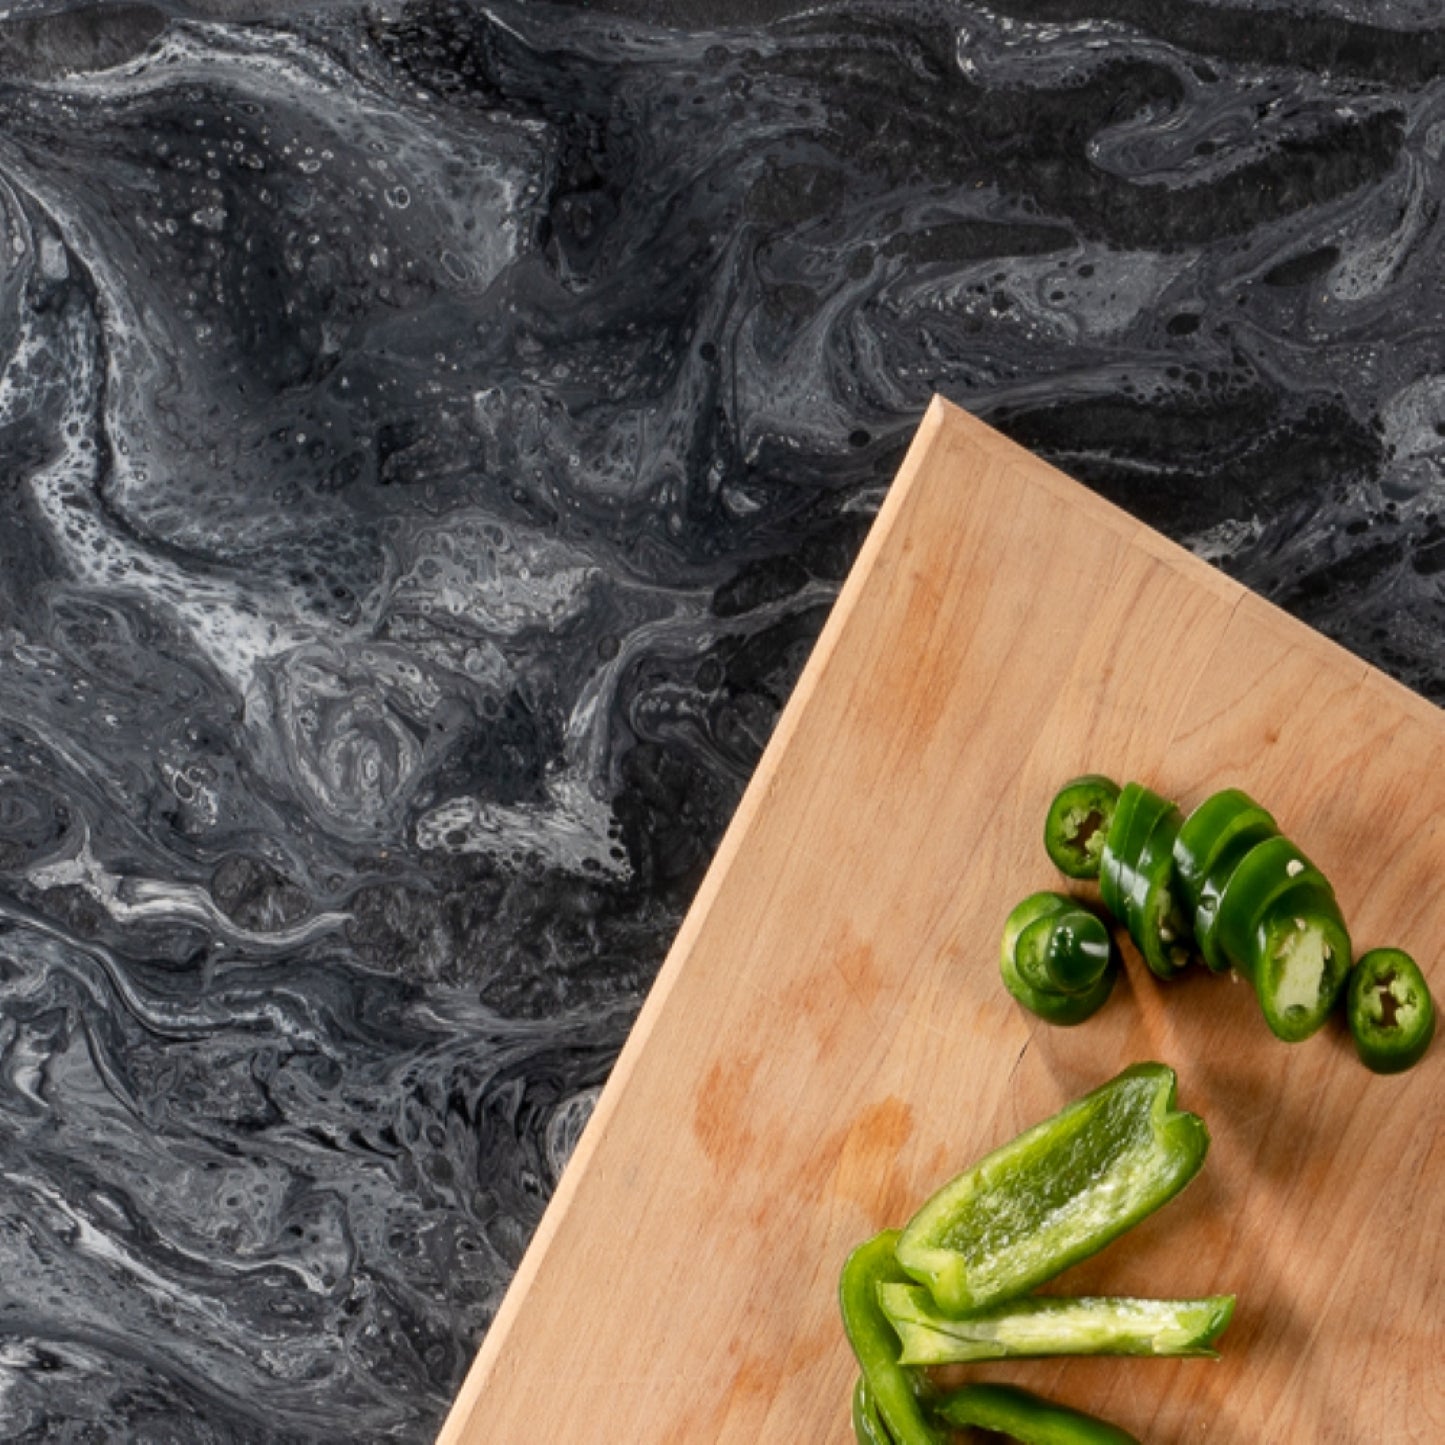 Functional Art for Every Kitchen: Titanium Alloy Resin Countertop from Resin Expression